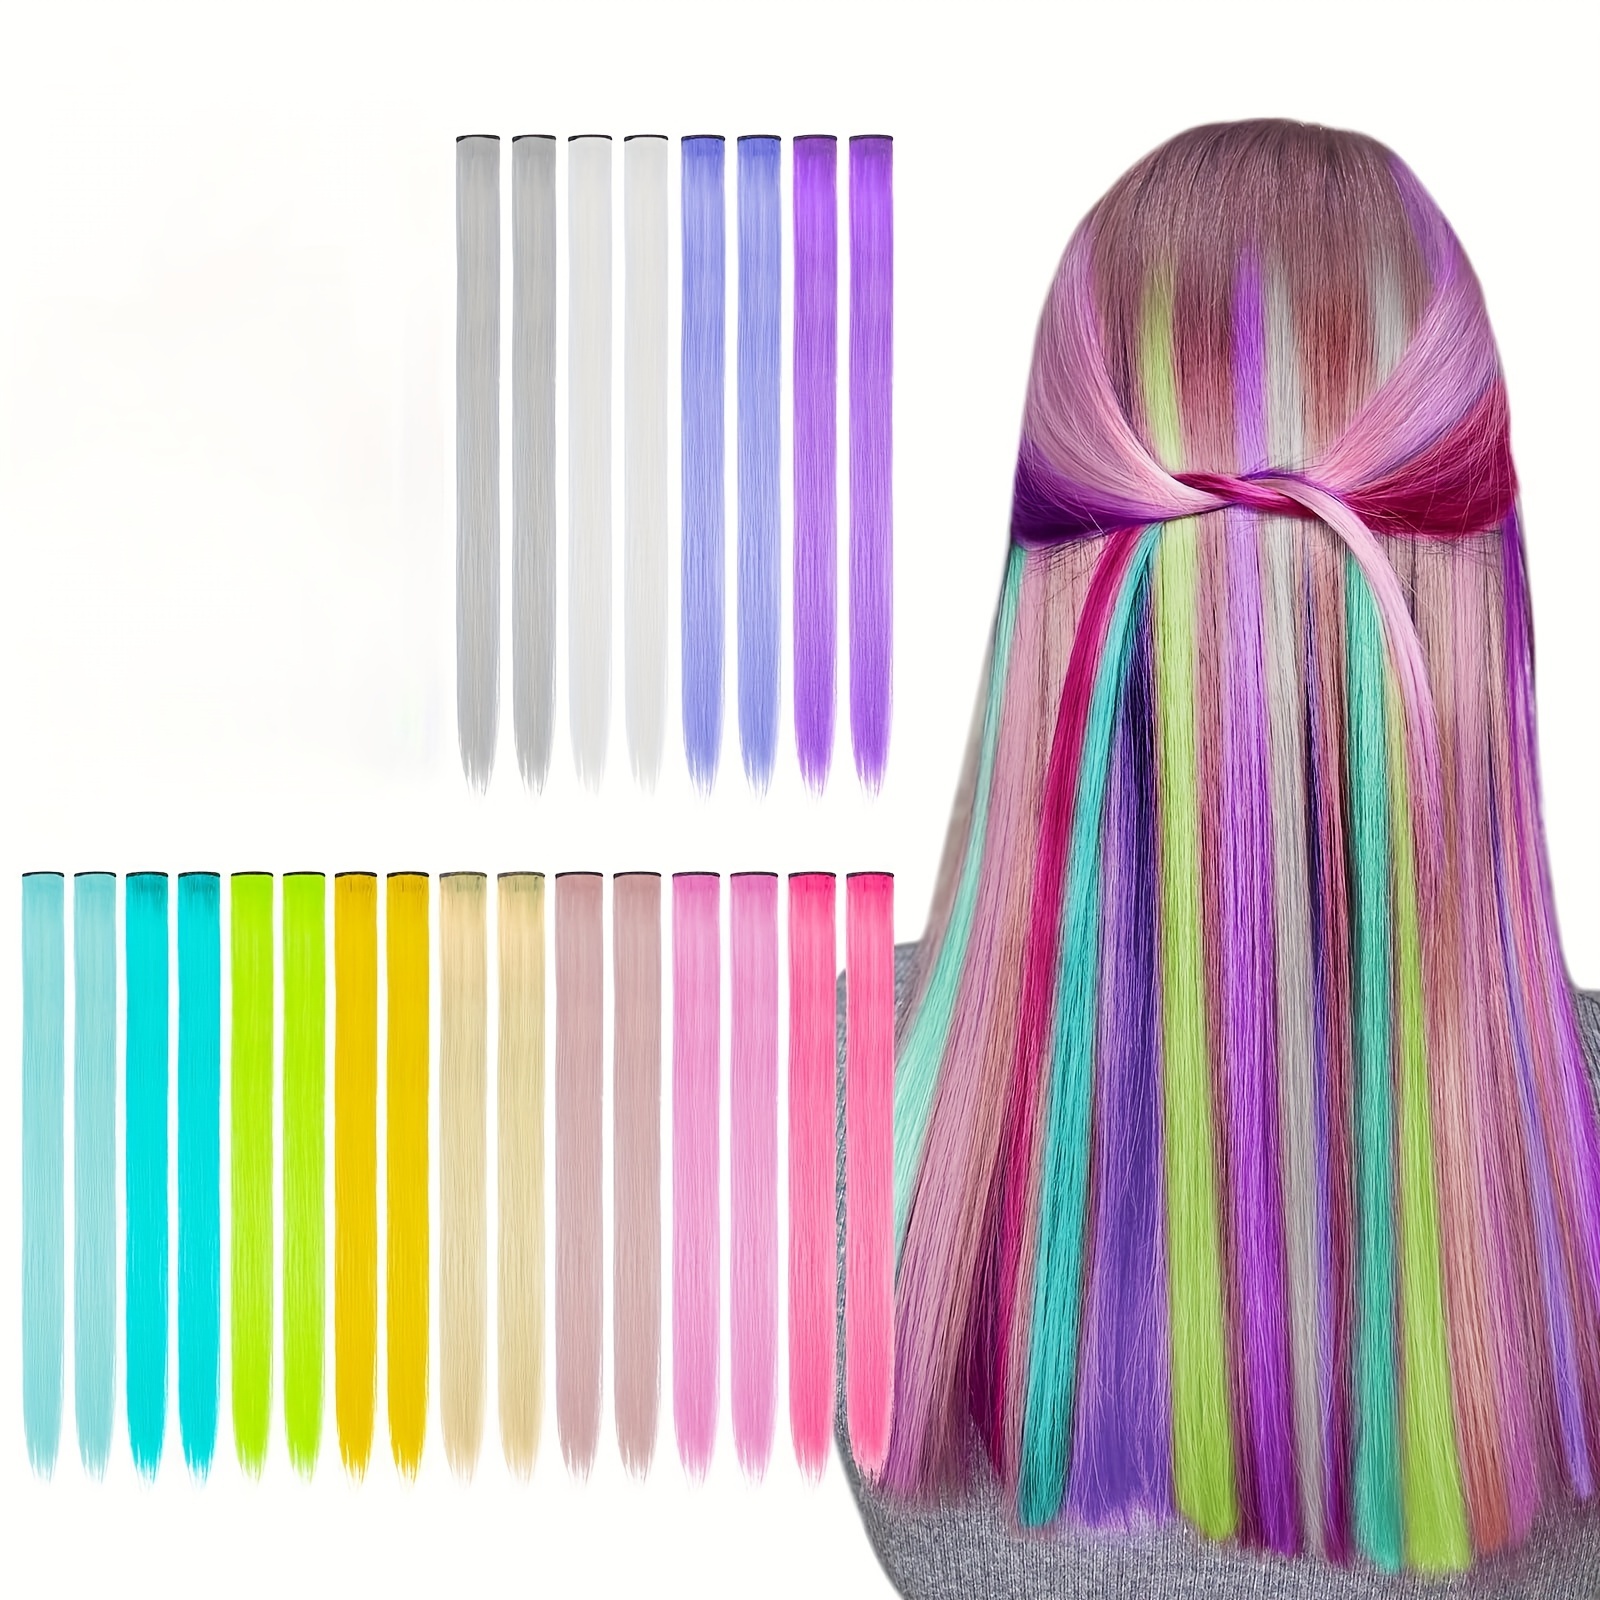 

Rainbow Clip-in Hair Extensions 20pcs, 20 Inch Colorful Synthetic Hairpieces For Girls, Easter Basket Stuffers, Party Highlights, Temporary Hair Coloring Accessories - Random Colors